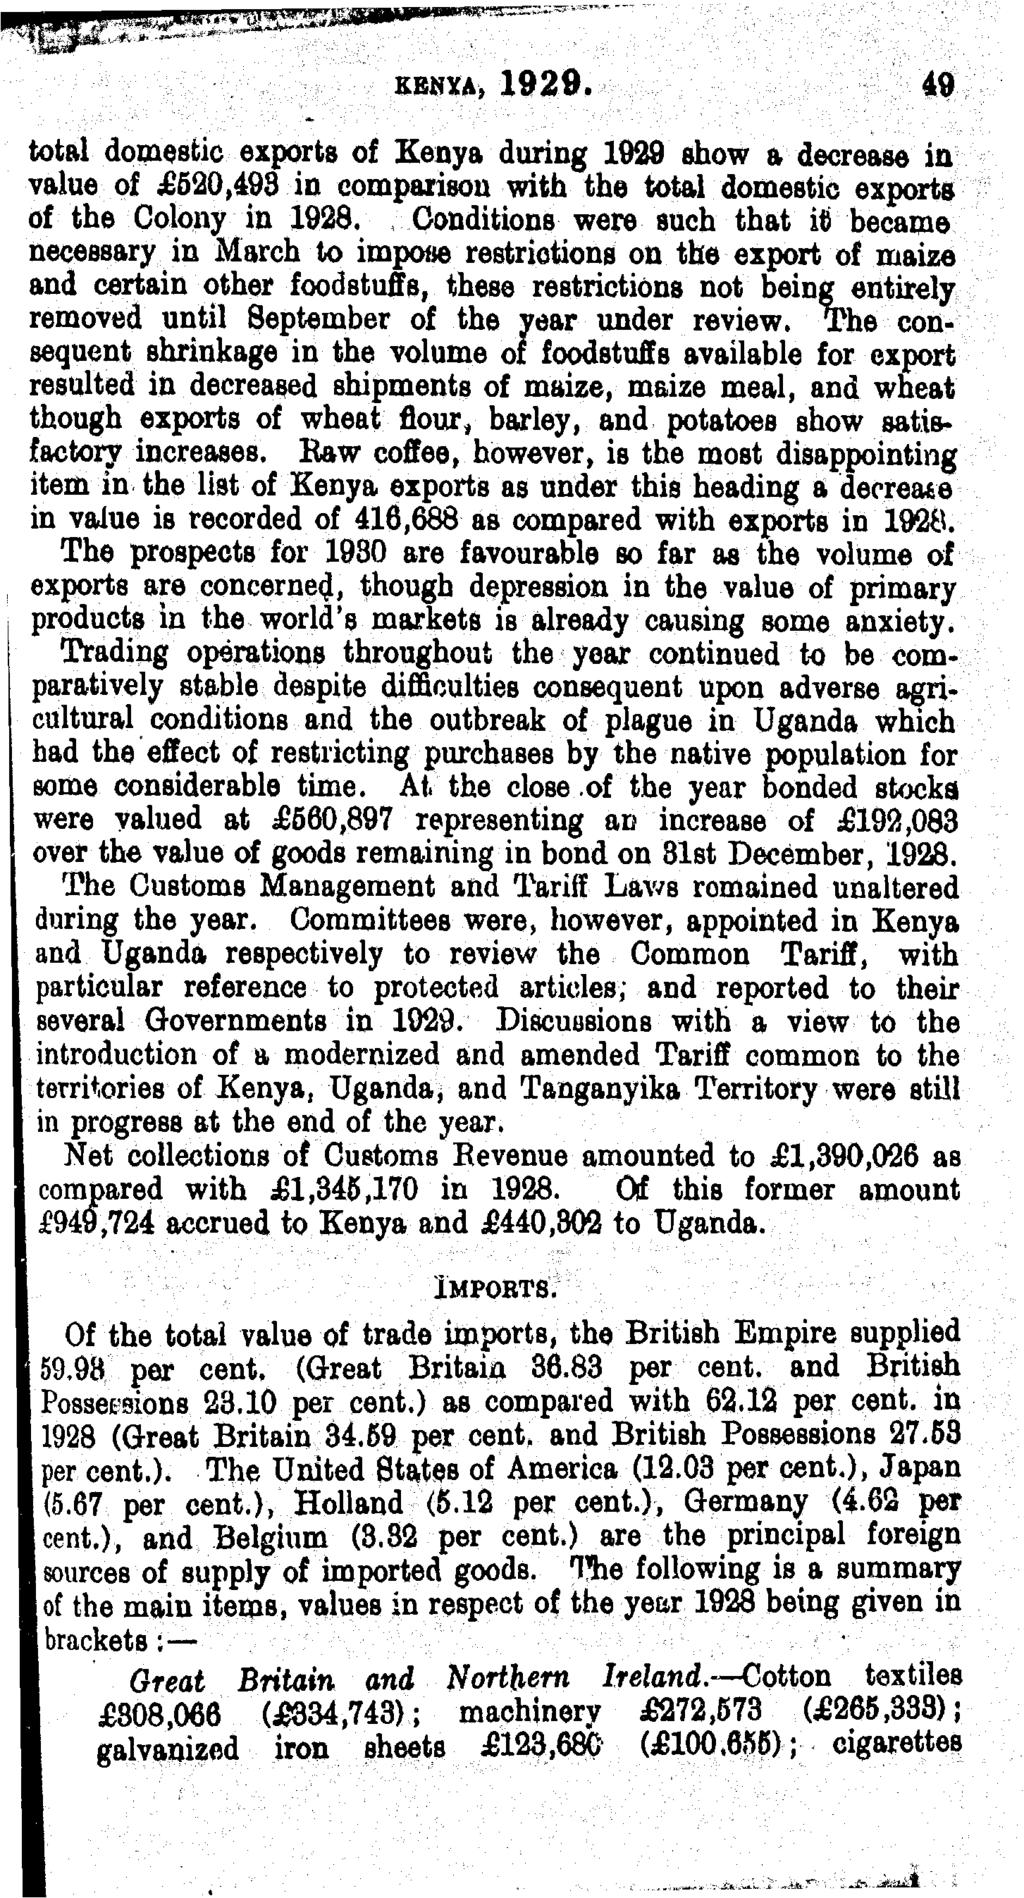 KENYA, 1929* 49 total domestic exports of Kenya during 1929 show a decrease in value of 520,493 in comparison with the total domestic exports of the Colony in 1928.